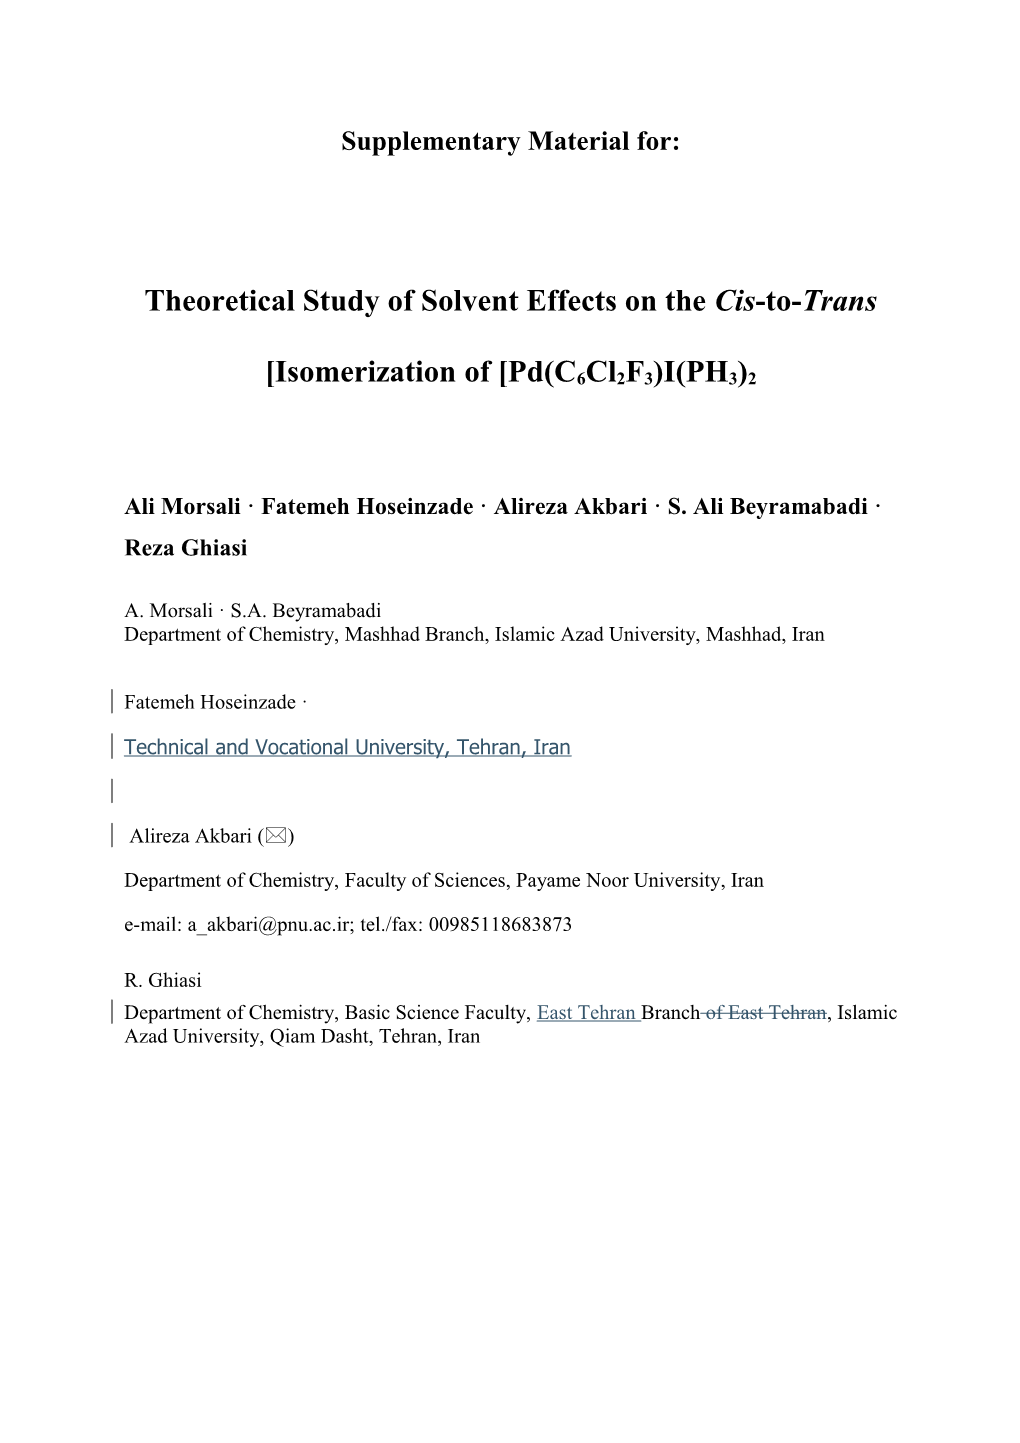 Theoretical Study of Solvent Effects on the Cis-To-Transisomerization of Pd(C6cl2f3)I(PH3)2